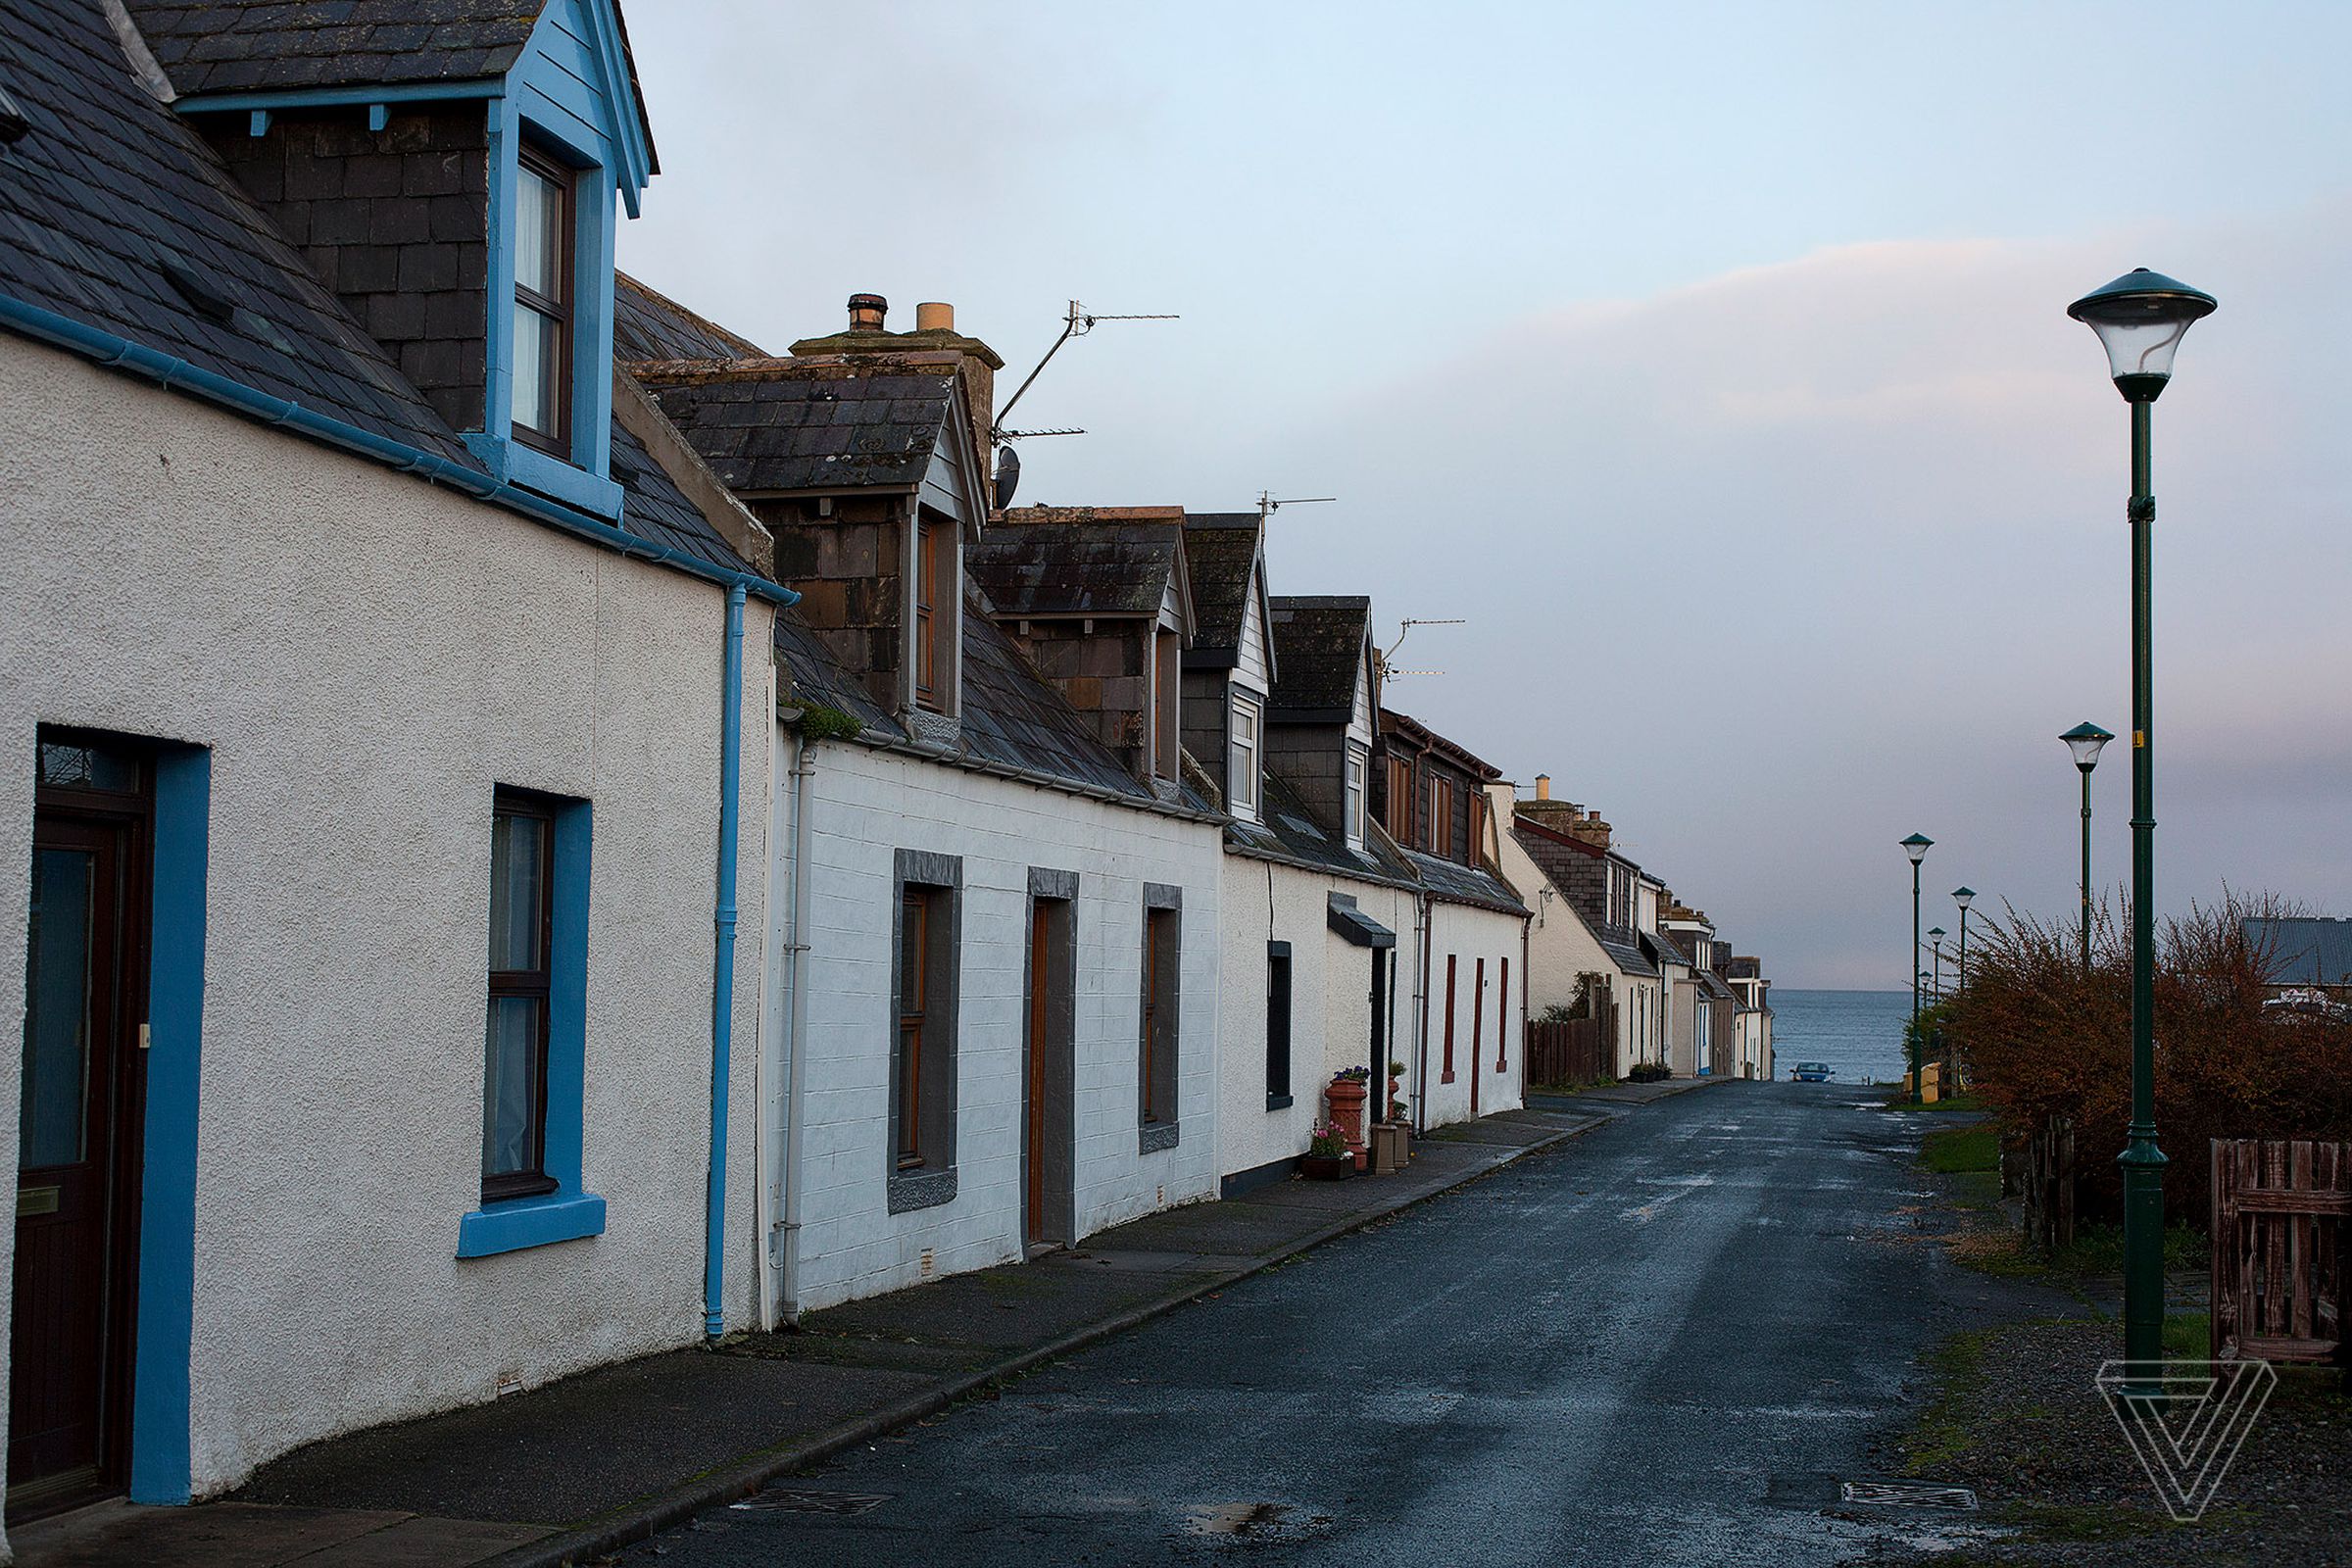 Homes in Embo, the small village that neighbors Coul Links.